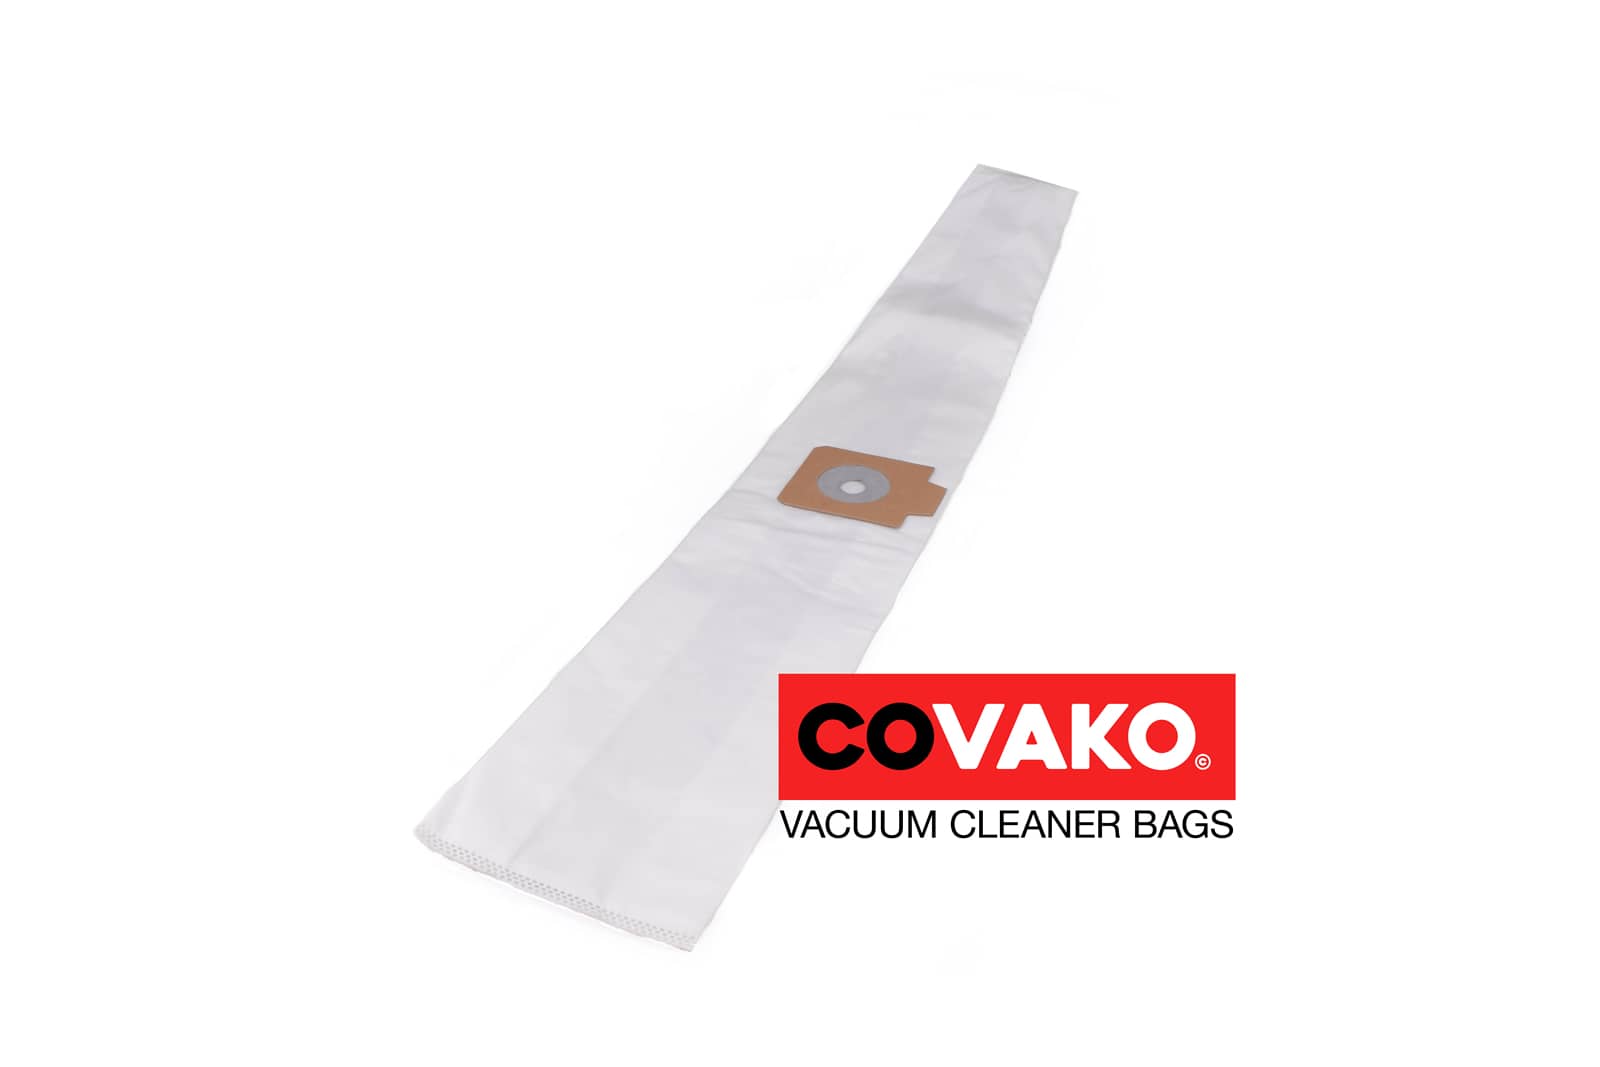 Oehme Otto GS 20 de Luxe / Synthesis - Oehme Otto vacuum cleaner bags